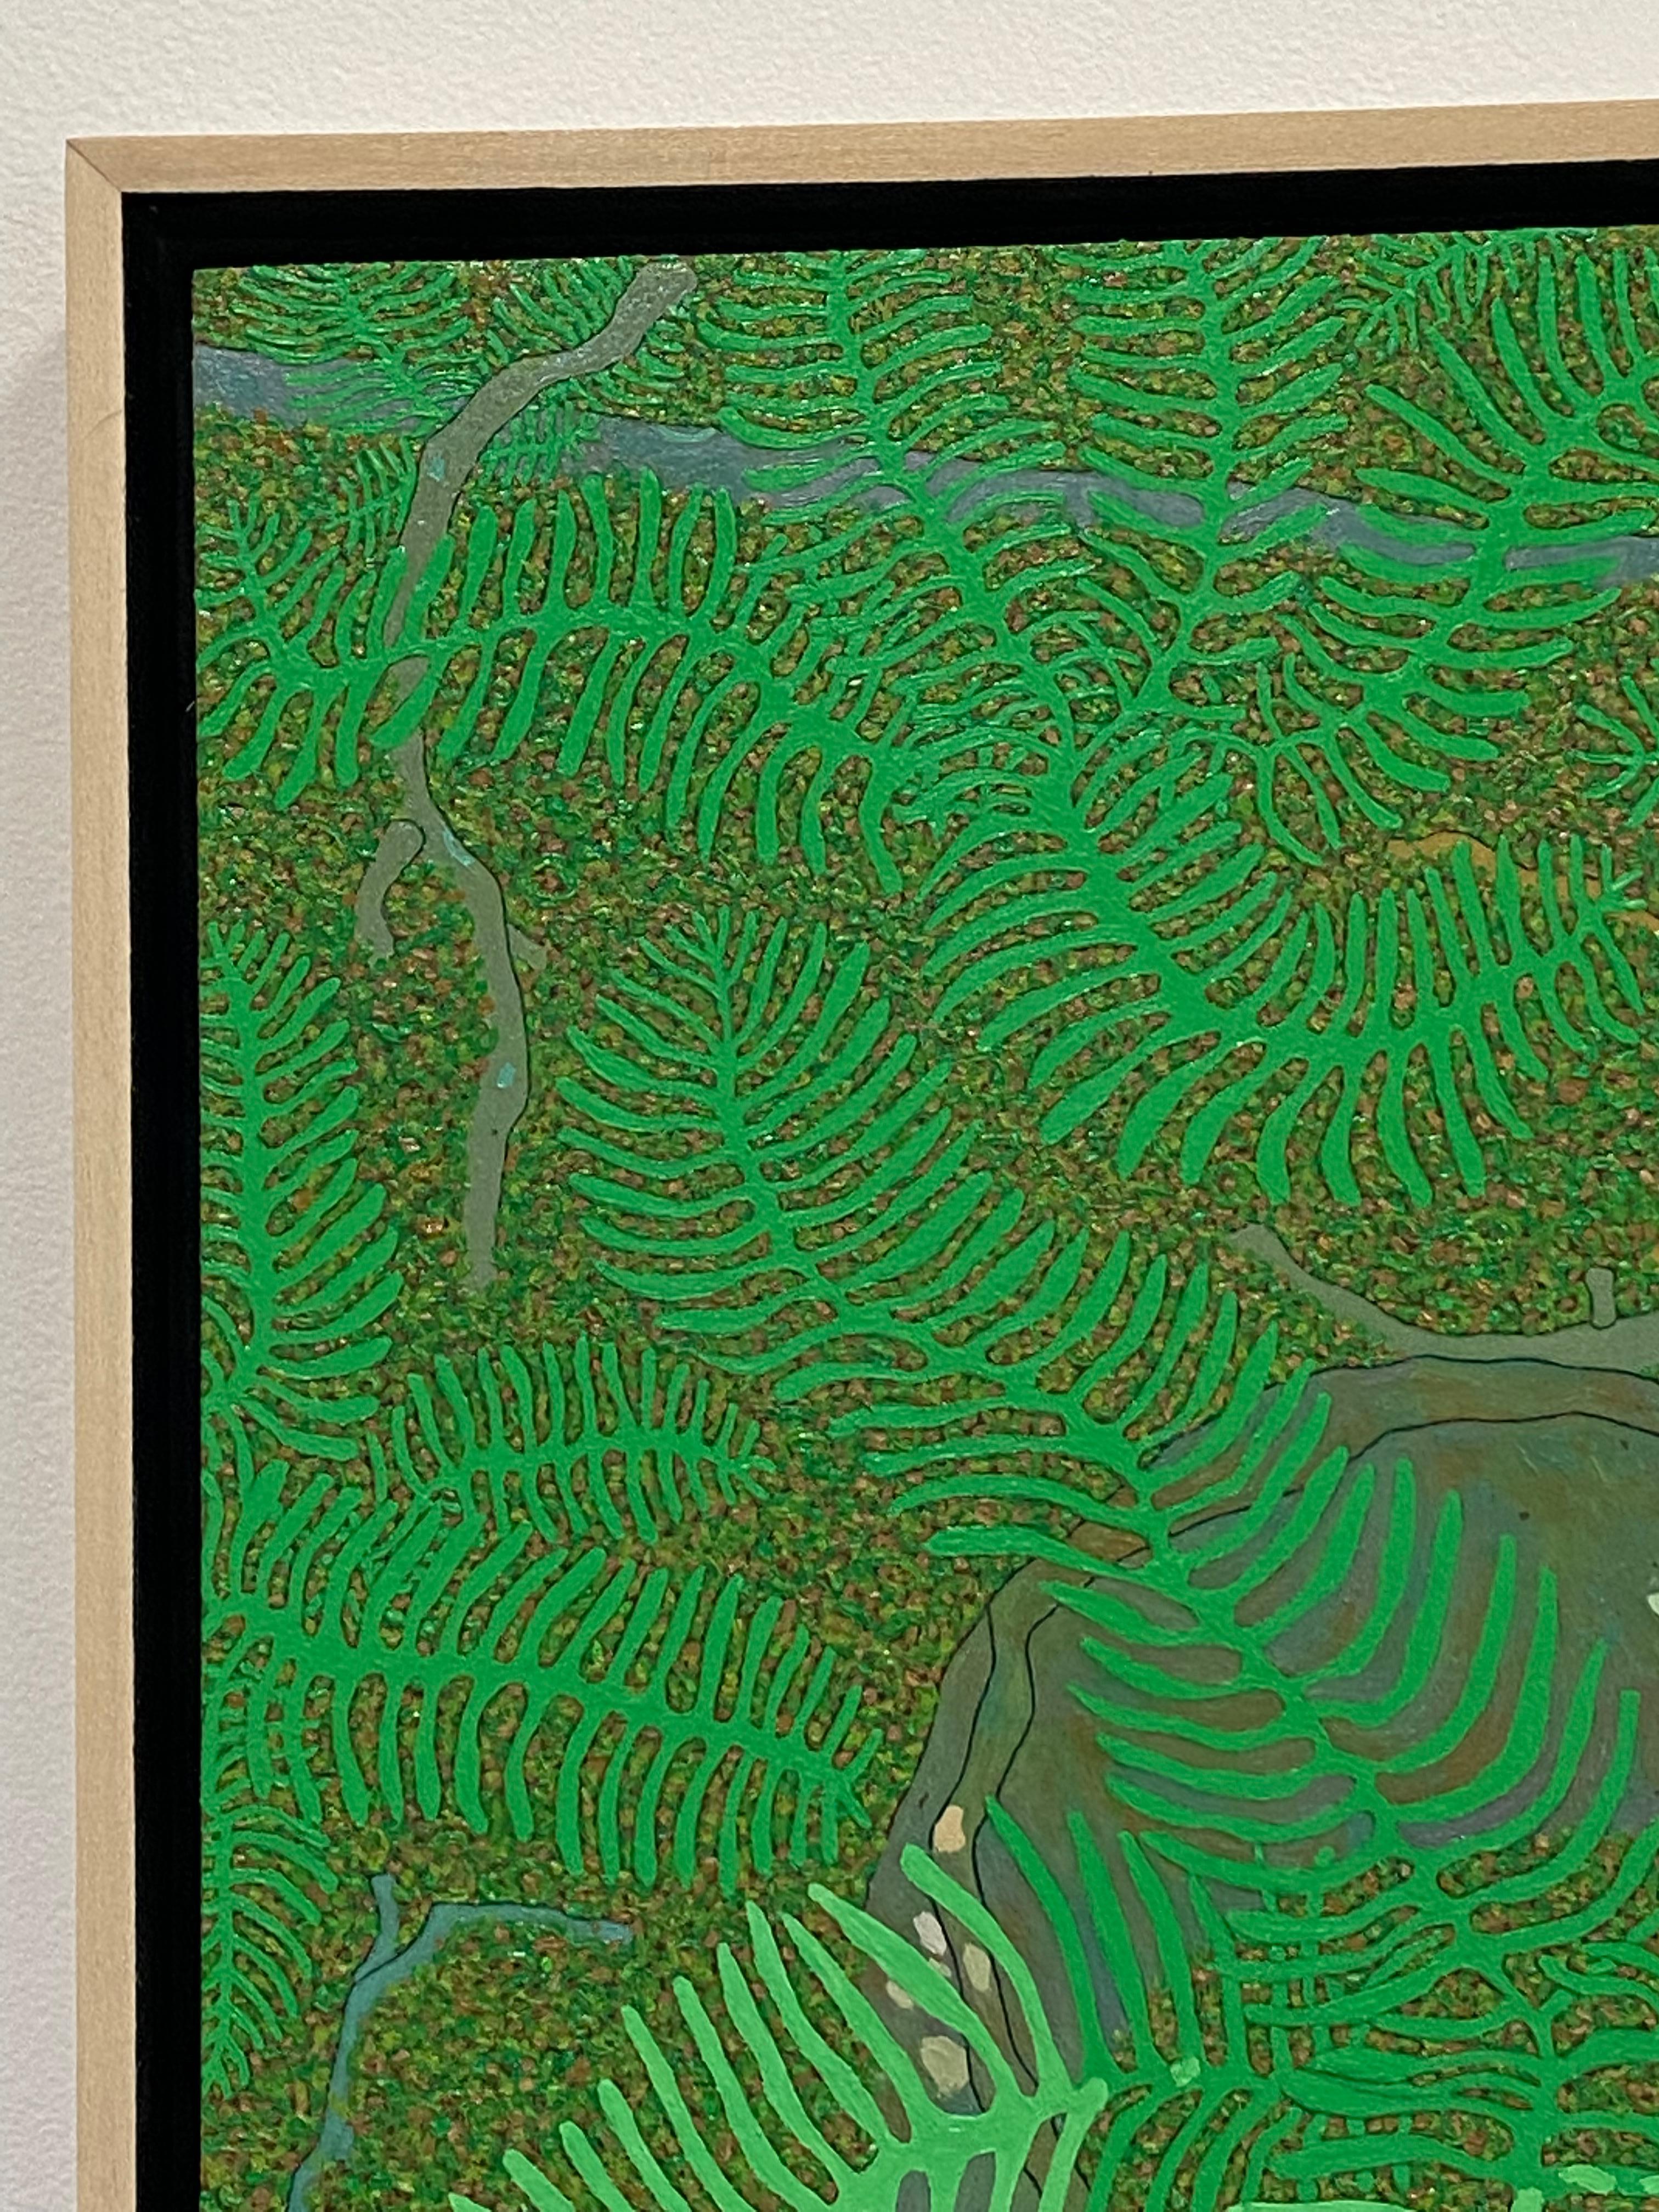 The densely lush forest of Hennen's Wyatt Mountain, Virginia home are the subject for this rich, highly detailed landscape painting. A bed of verdant green ferns on the moss-covered forest floor suggests the quietude and serenity of nature in